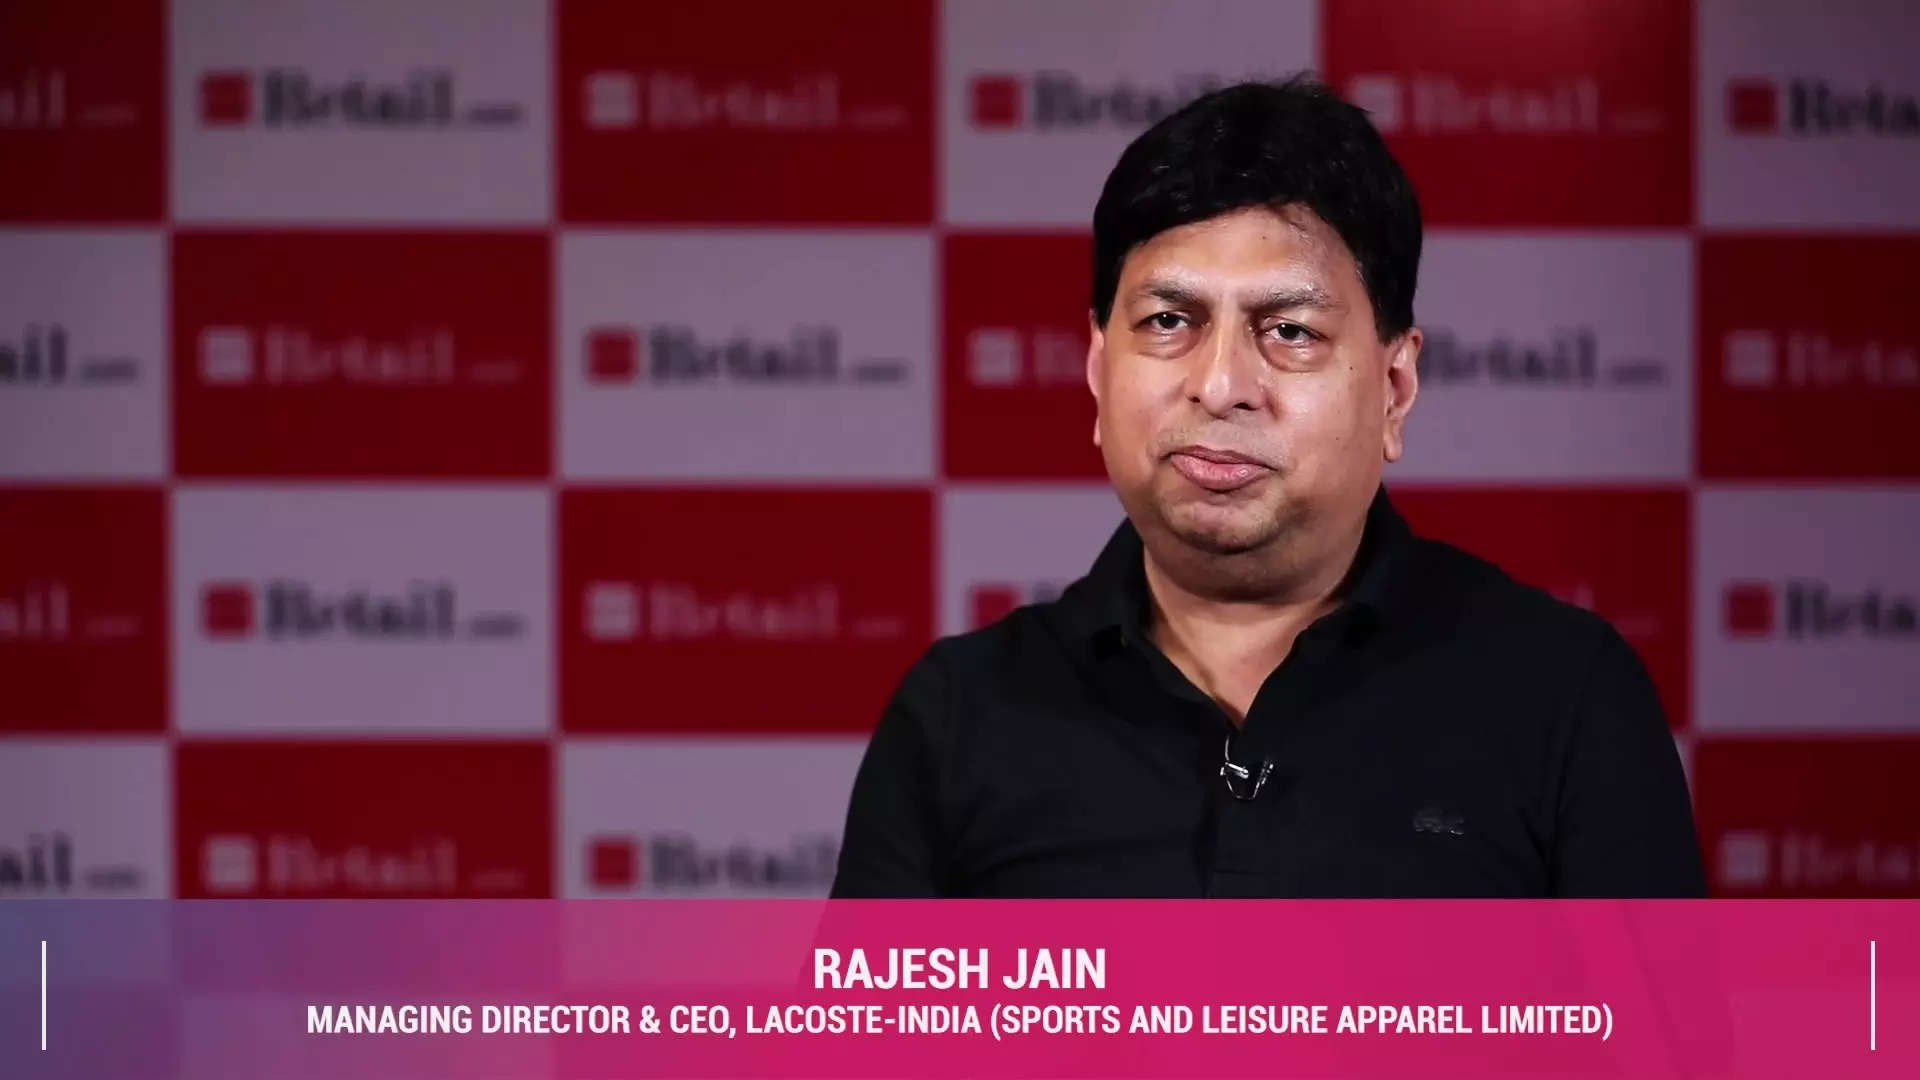 We look for growth in omnichannel: Rajesh Jain, MD and CEO, Lacoste-India